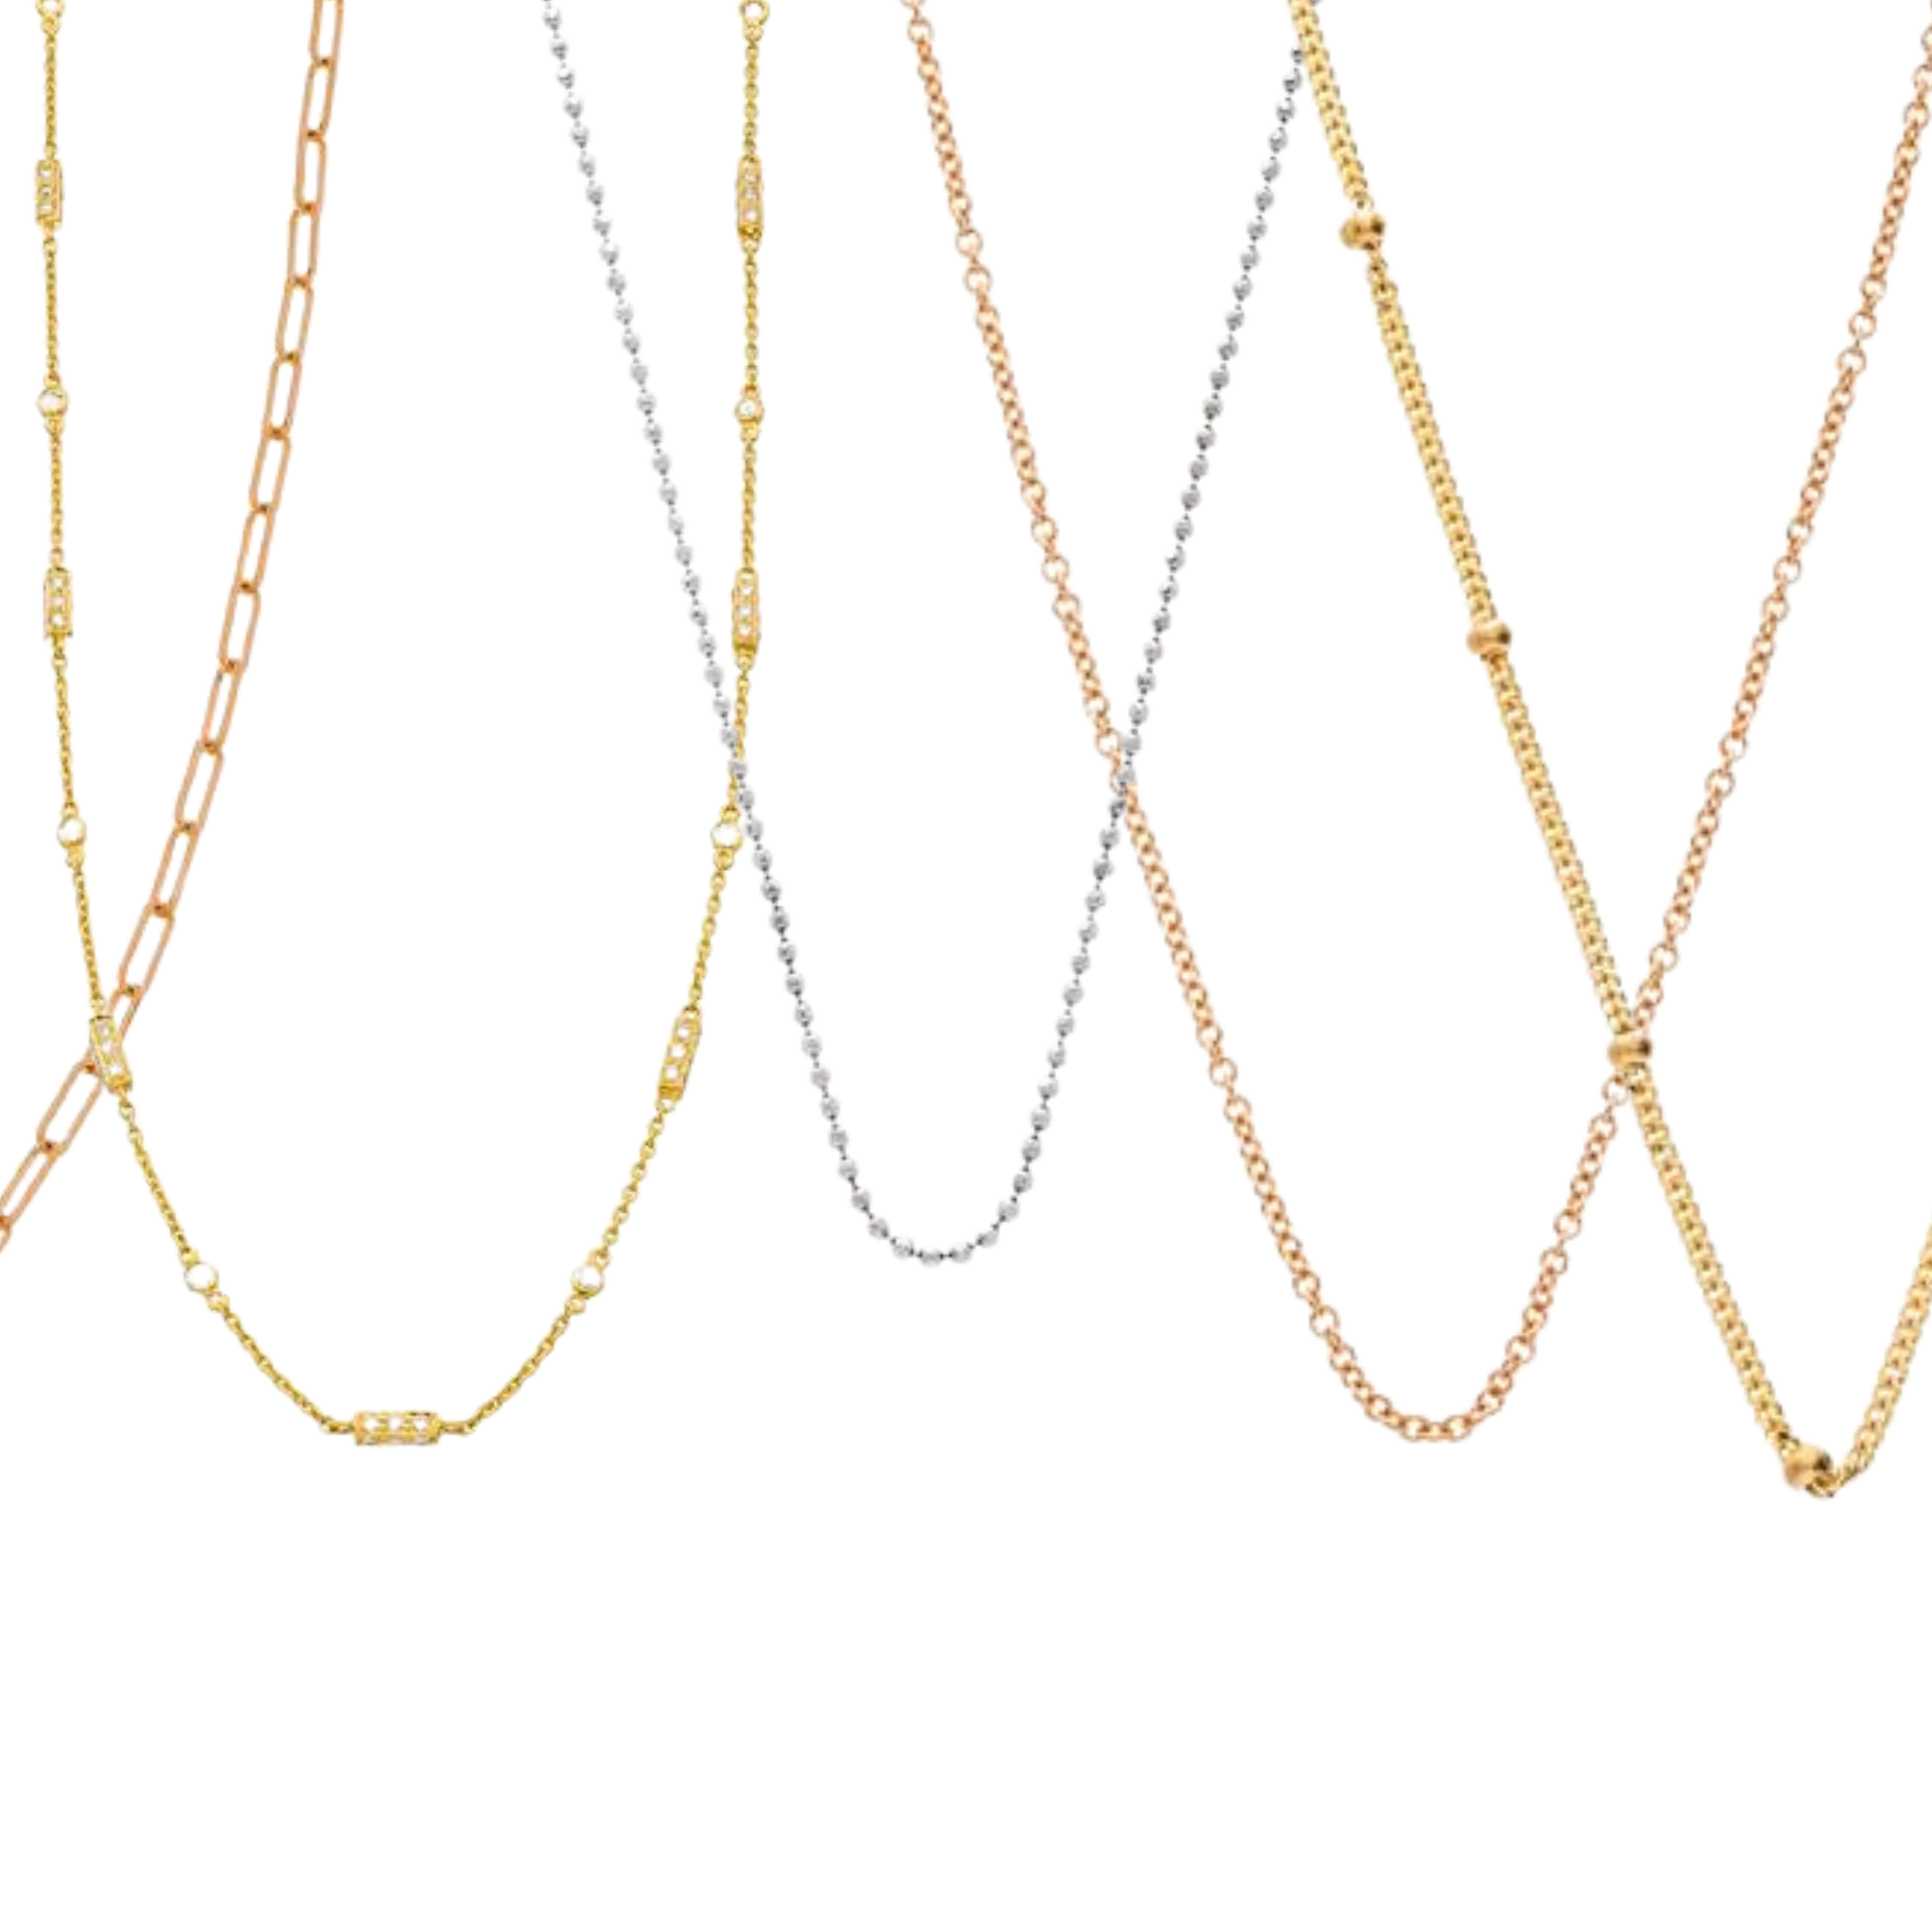 Assortment of Sethi Couture Gold Chains